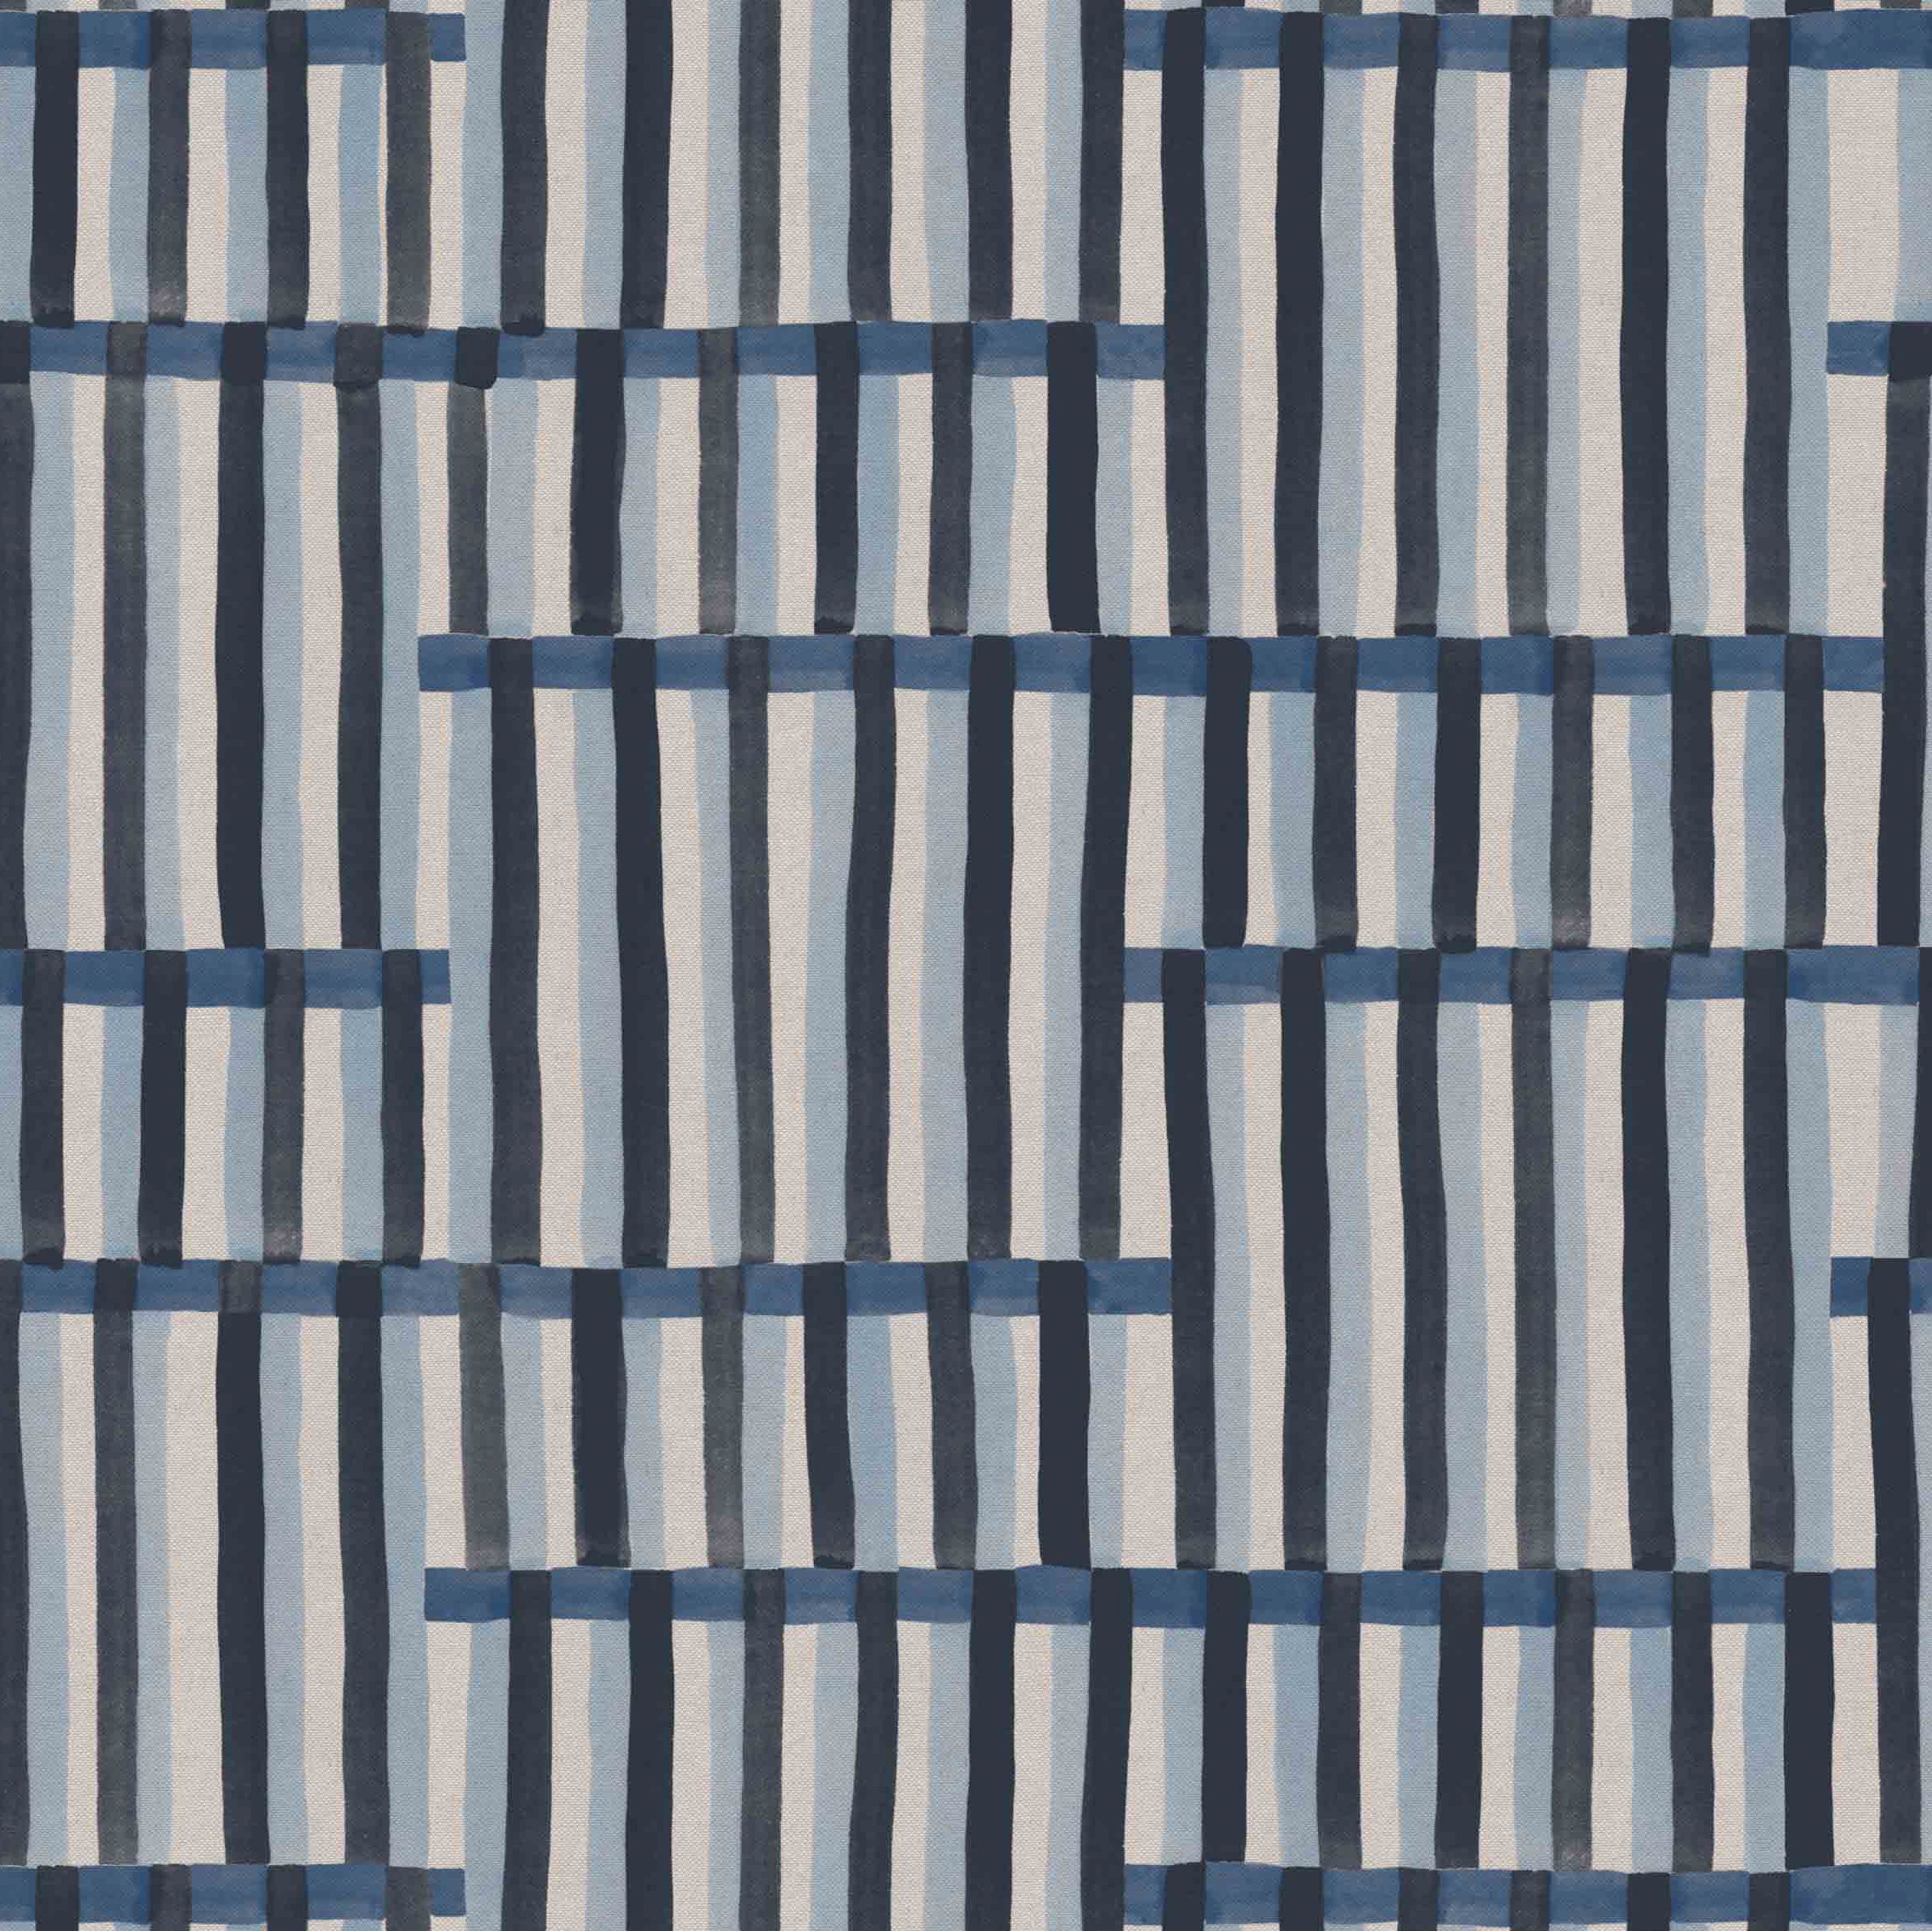 Detail of fabric in an interlocking striped pattern in shades of blue, navy and cream.